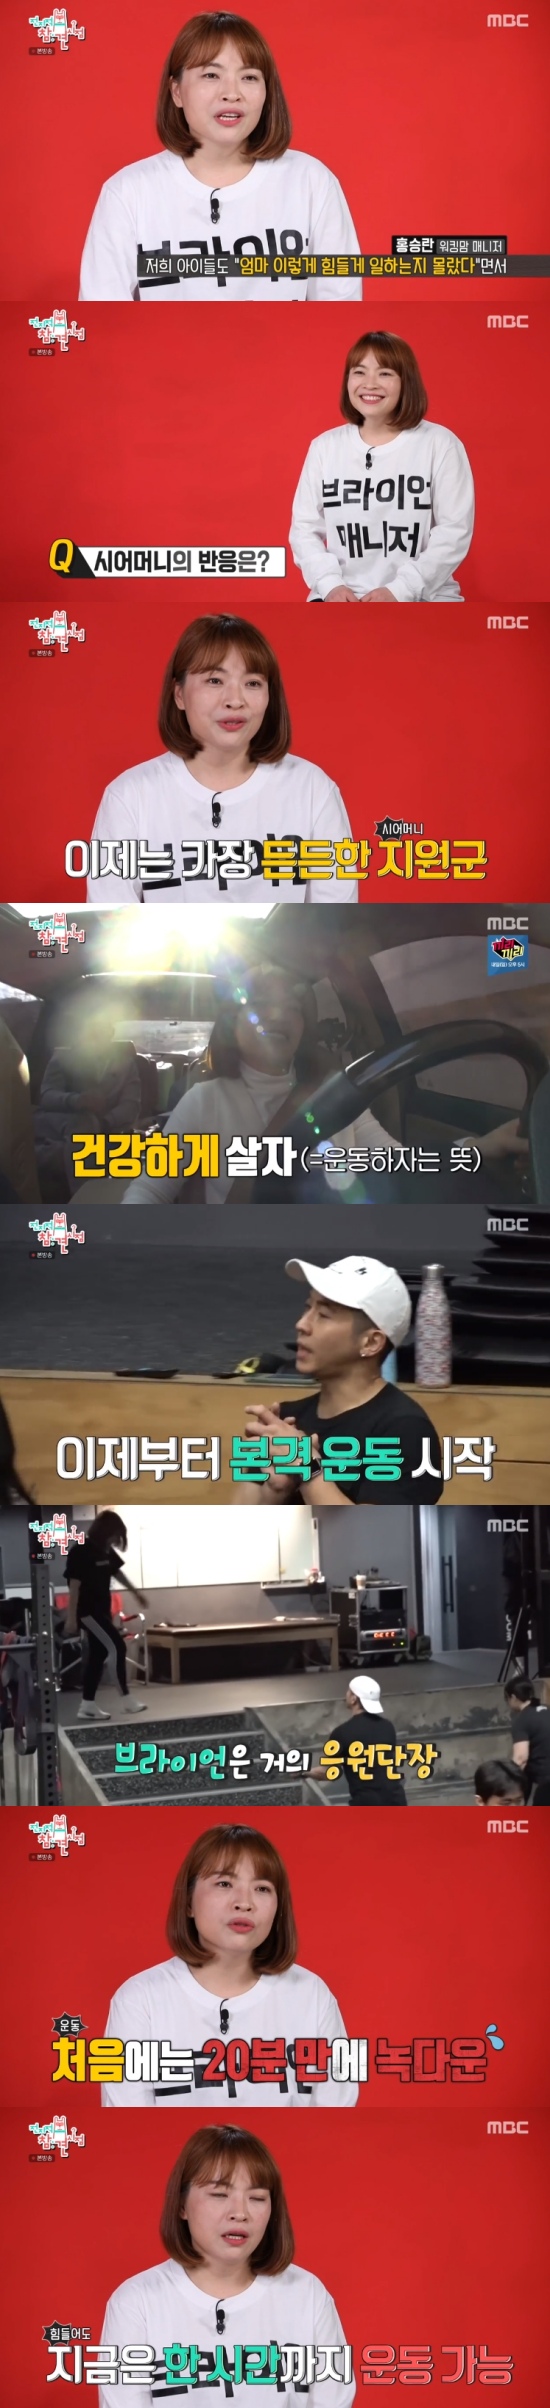 The routine of Fly to the Sky Brian Jooo and comedian Hong Hyon-hee has been revealed.In MBC Point of Omniscient Interfere broadcast on the 1st, Brian Jooo and Hong Hyon-hee each released their daily life with Manager.The main character in the first video on the day was Brian Jooo.Brian Jooo Manager said of the recent changes since his appearance in the Point of Omniscient Interfere that he was crying when he saw the broadcast (my husband) and said that his children were better and I did not know my mother worked so hard.The crew wondered about her mother-in-laws reaction, and Brian Jooo Manager said, It was an unexpected reaction. It was so good to see my son do that.He said he was so happy, he said.Brian Jooo Manager then met Brian Jooo at Suseo Station.Brian Jooo went to the gym to play The Lesson, and in the meantime he asked Brian Jooo Manager to exercise.Brian Jooo Manager worked out in the gym with Brian Jooo, while Brian Jooo worked out happily as he played with gym members.In particular, Brian Joo encouraged Brian Jooo Manager whenever he was tired, and adjusted his intensity to the situation.Brian Jooo Manager said: You say you can keep doing it next to you, you cant get up tired in about 20 minutes at first, you can now get close to an hour.I think its all a team together. If one person is behind, I will continue to fight. Furthermore, Brian Jooo Manager said, After meeting Brian Jooo, I was doing a gymnasium, flower The Lesson, so I was able to do various things and changed my vitality.Brian Jooo also suggested, Because I exercised, Manager chooses lunch, and Brian Jooo Manager chose tteokbokki, fried, and sundae.Brian Jooo ate tteokbokki sweating for Brian Jooo Manager even though he was not good at spicy food.It was also revealed that Brian Jooo was leaving for United States of America a month later, and Brian Jooo Manager said, I go to United States of America to study acting and want to audition.I think it will be from mid-February to the end of April. Brian Jooo Manager asked, Are you coming? Brian Jooo quipped, saying, Do not you live if I come?Brian Jooo Manager beamed, saying it was Feelings sending his sons army.In addition, Brian Jooo appeared as a guest at the Ailee concert with joy.At this time, Brian Jooo had to go to Pyeongtaek by 9 oclock because of his birthday party, and arrived at the party place an hour late because of the delay in the concert.Brian Jooo Manager attended a birthday party with a stylist, and greeted Brian Jooos foreign friends with a welcome greeting.Brian Jooo Manager used English as he learned from Brian Jooo, and laughed because he said Brian Jooo was the reason he was late, unlike Brian Jooo asked him to do.Brian Jooo Manager said in an interview with the production team, I think I am happy and happy to meet Brian Jooo.I want to be a helpful manager. I will try to do that. The main character in the second video was Hong Hyon-hee; Hong Hyon-hee Manager said, There is a new movie.Its a movie with Jeon Do-yeon and Jung Woo-sung. Today was a parody video schedule. Hong Hyon-hee said, I watched the movie and Jeon Do-yeon was really sexy.Hong Hyon-hee said: Today we have to treat it.The actors asked, Do not you fall in with Manager when you enter the work? Hong Hyon-hee Manager promised, I understand.Hong Hyon-hee and Jay-Won visited the meridian massage shop ahead of the shoot; the two endured pain and received meridian massages, and immediately found the shop.Hong Hyo-hee asked for styling, saying, Im sorry, its Jeon Do-yeon, Jung Woo-sung today. Hong Hyo-hee wore a single-headed wig worn by Han Hyo-ju.Jay wrote, Can I tell you this? The pickpocket looks good. Not a single shot. Its Jung Hyung-don, dressed up as Uhm Jung-hwa.Hong Hyon-hee Manager prepared Kimbap that actresses eat to save Hong Hyon-hees flag, and praised the way he transformed with a single-headed head, saying, Feelings are really good.In the next trailer, Hong Hyon-hee and Jay-Won were photographed in a parody video.Photo = MBC Broadcasting Screen